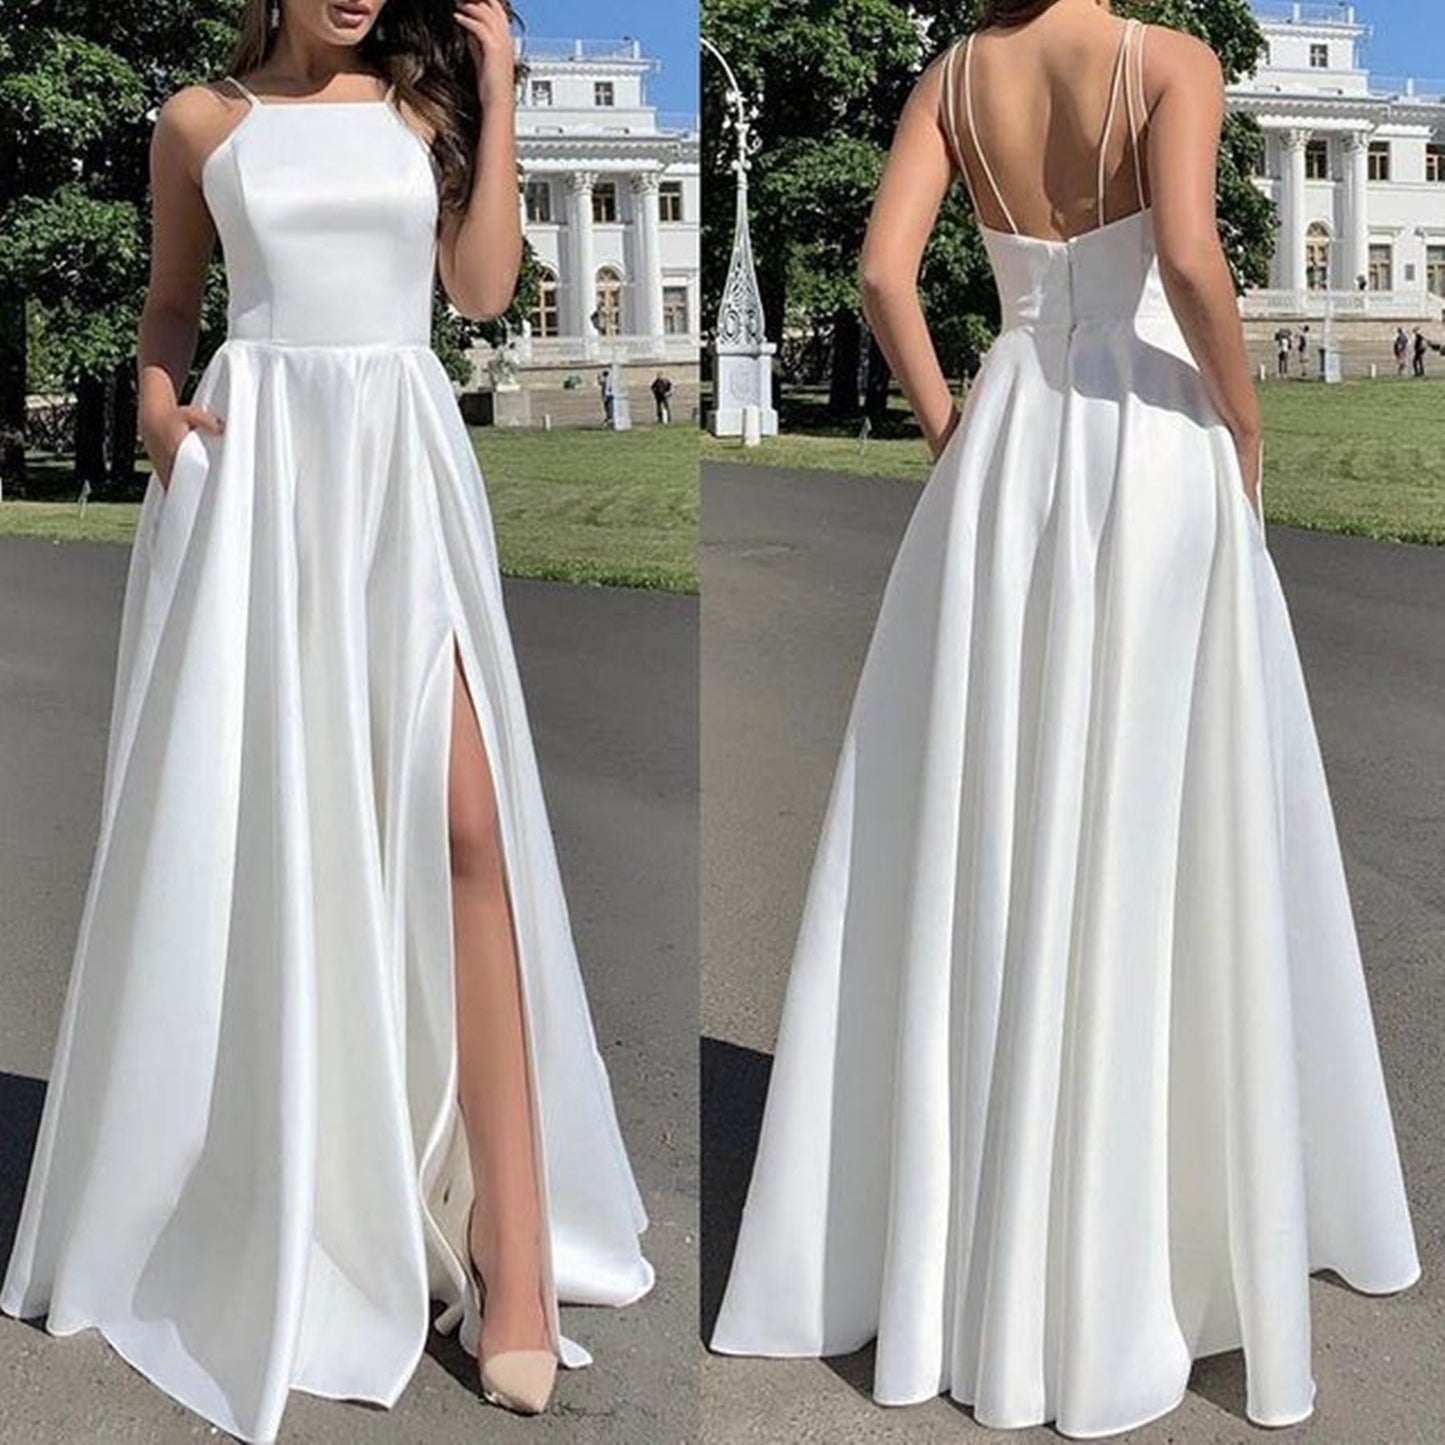 Simple Open Back White Satin Long Prom Dresses with High Slit, Long White Formal Graduation Evening Dresses 